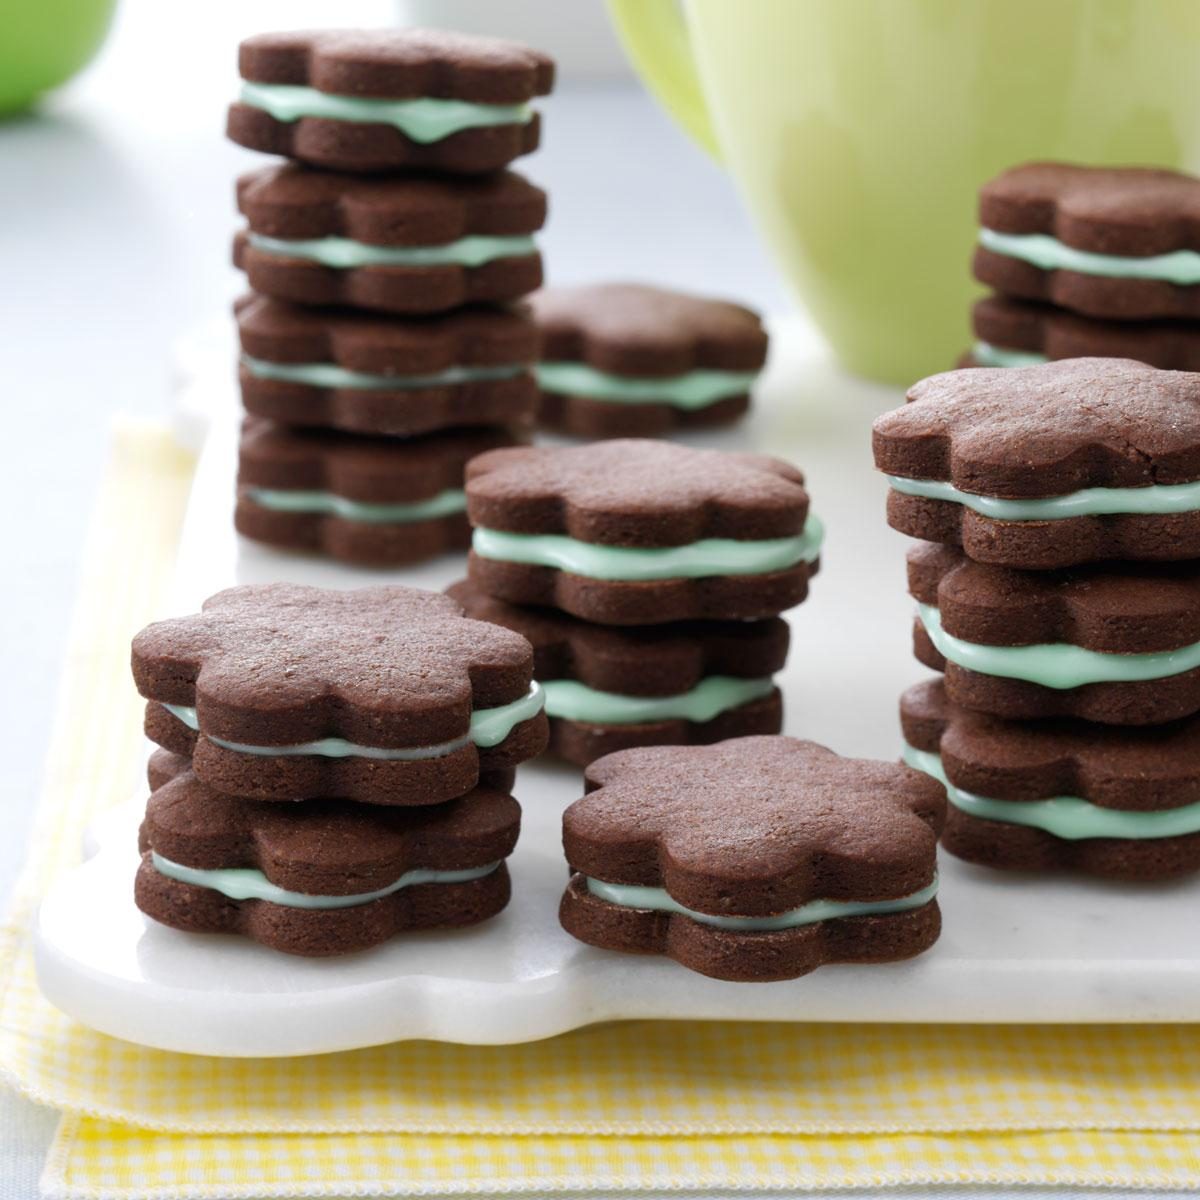 Chocolate Mint Wafers Recipe: How to Make It